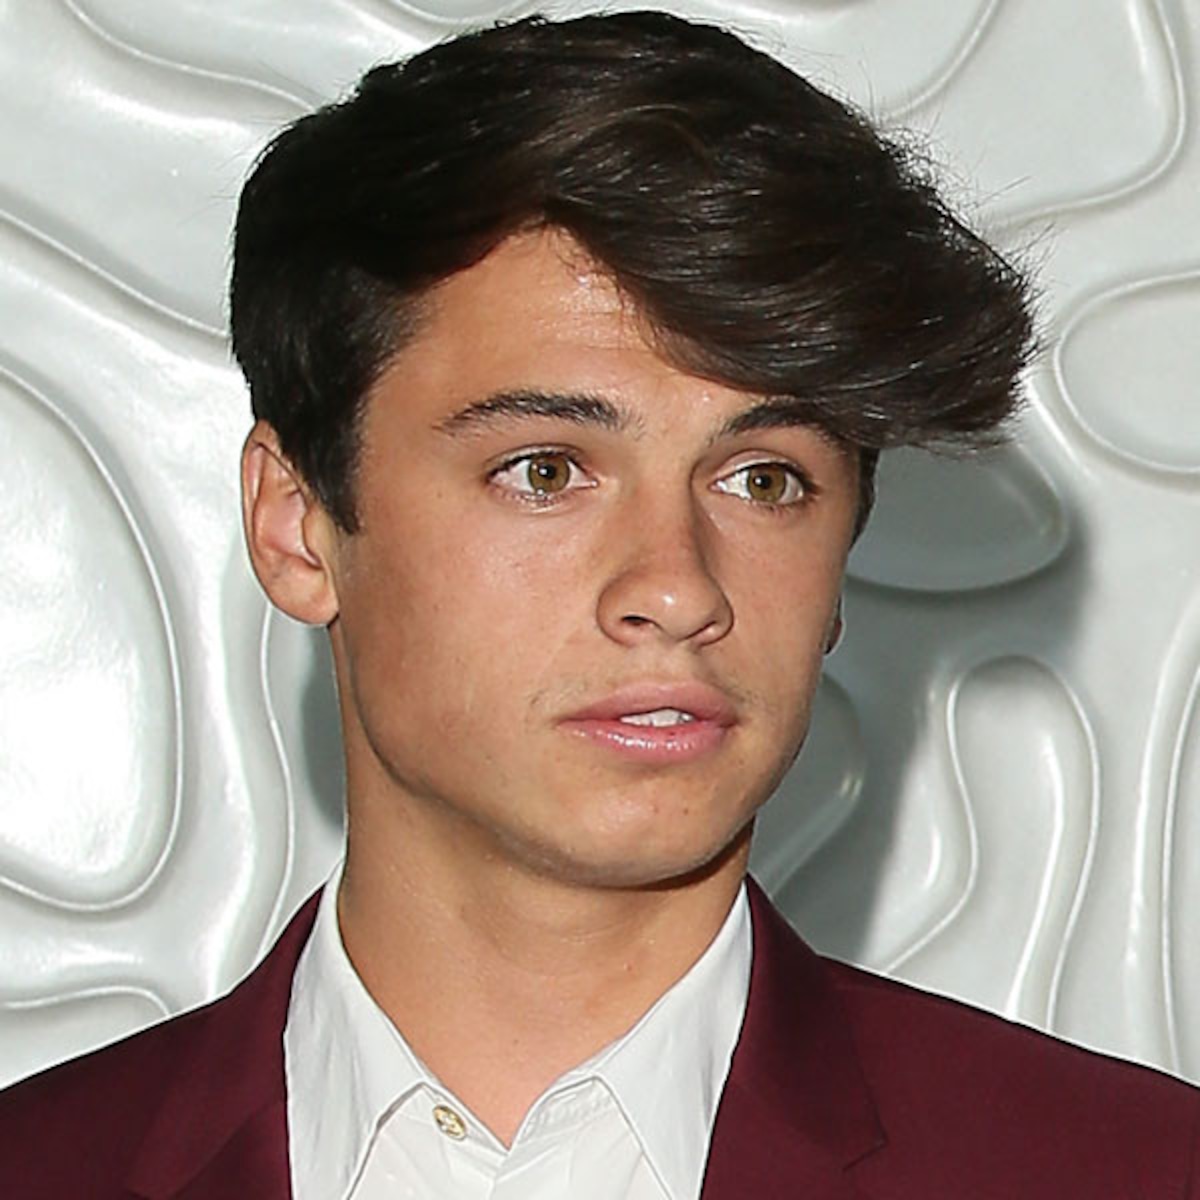 Pamela Anderson's Younger Son Is Now a Model - E! Online